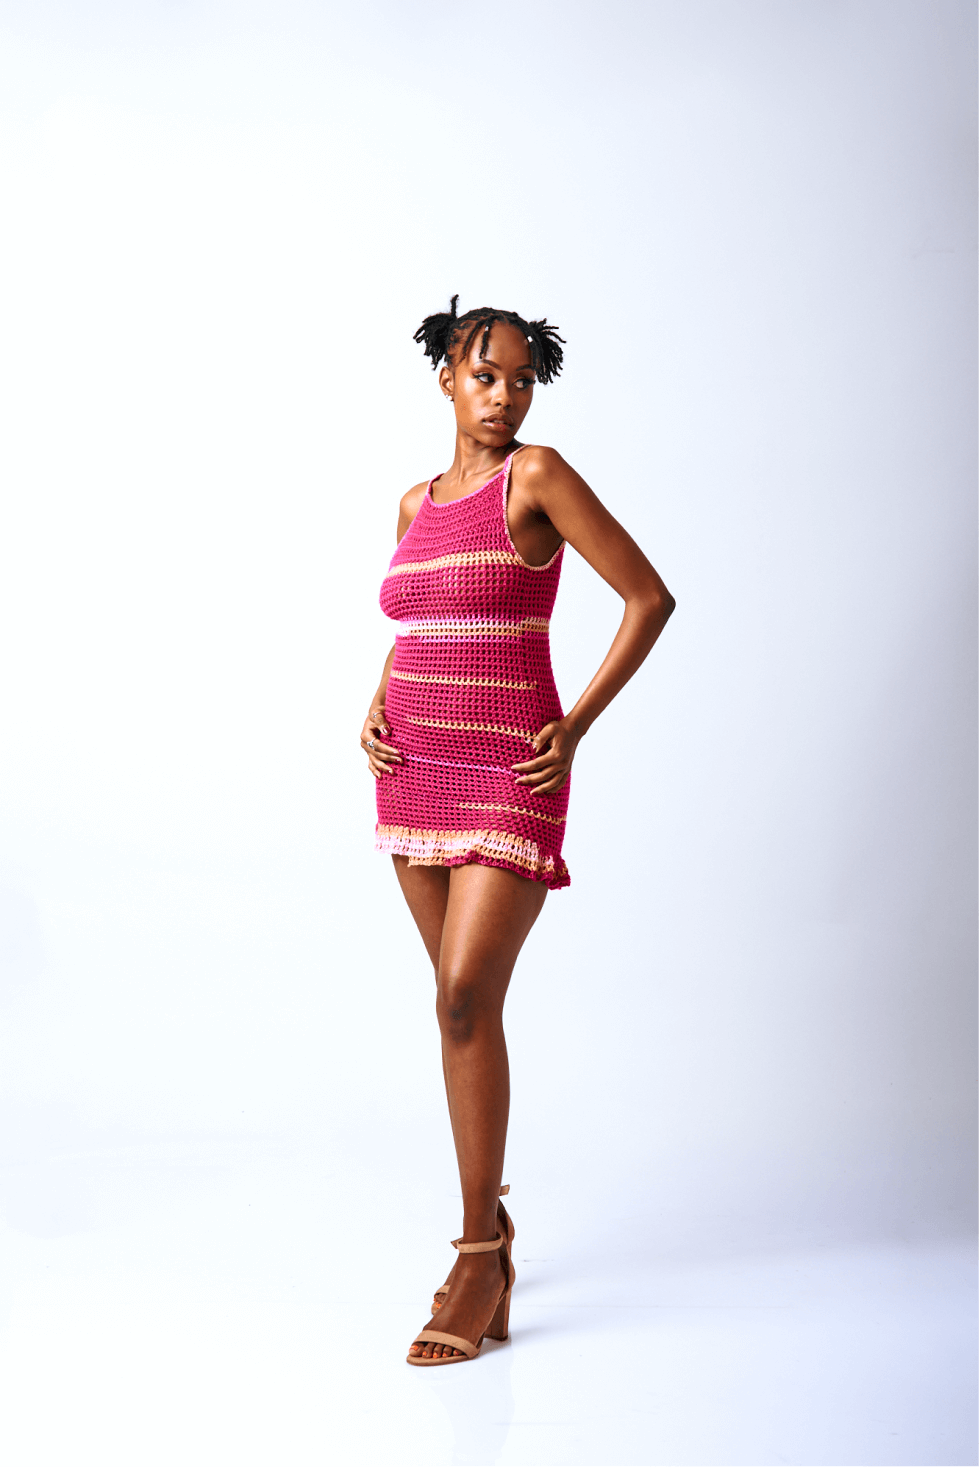 Shop Lena Crochet Open-Knit Dress by Olisa Kenya on Arrai. Discover stylish, affordable clothing, jewelry, handbags and unique handmade pieces from top Kenyan & African fashion brands prioritising sustainability and quality craftsmanship.